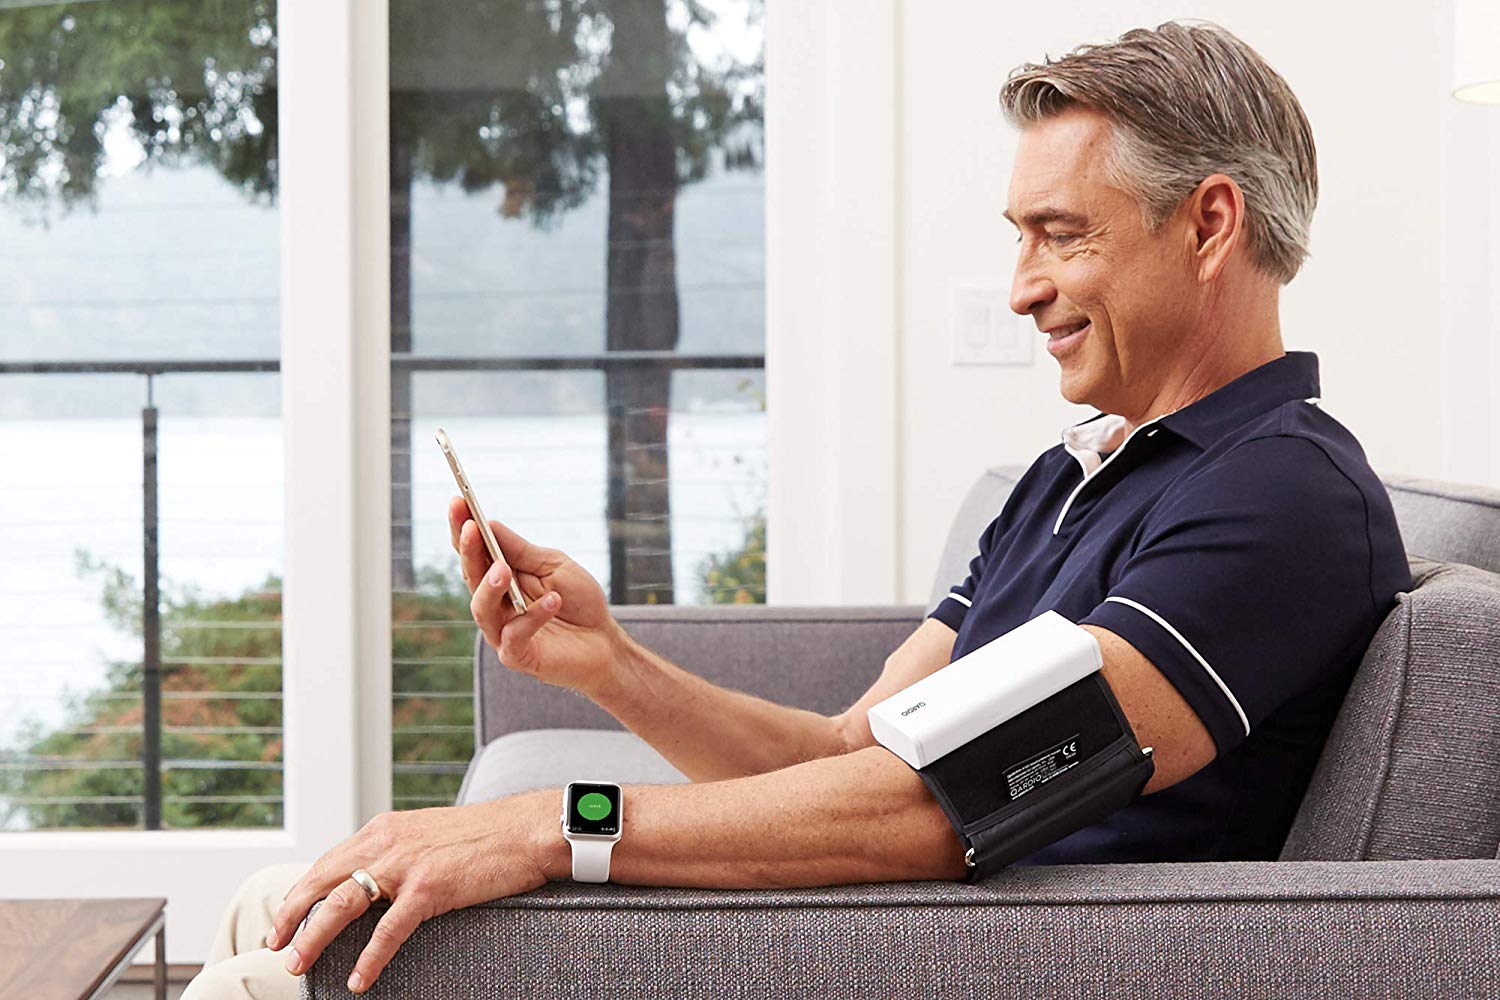 iProven Home Blood Pressure Monitor - Digital Blood Pressure Meter with  Upper Arm Cuff - Large Screen with